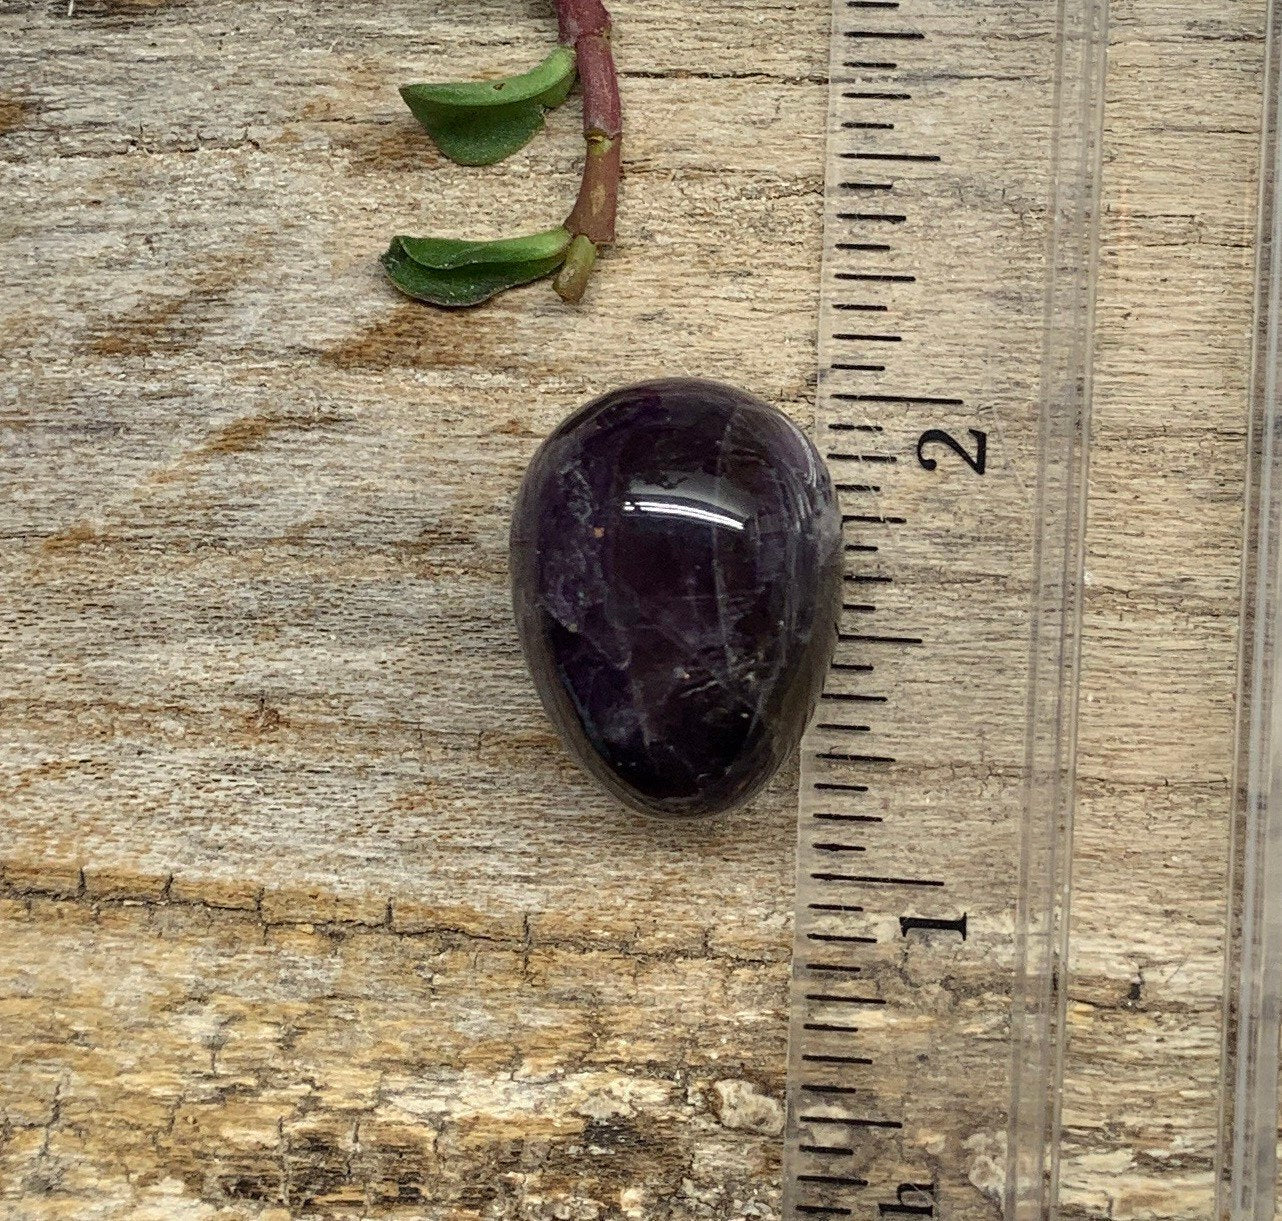 Shimmering purple amethyst egg with intricate patterns and a sense of mystique, displayed next to a ruler.  egg is approximately 3/4"